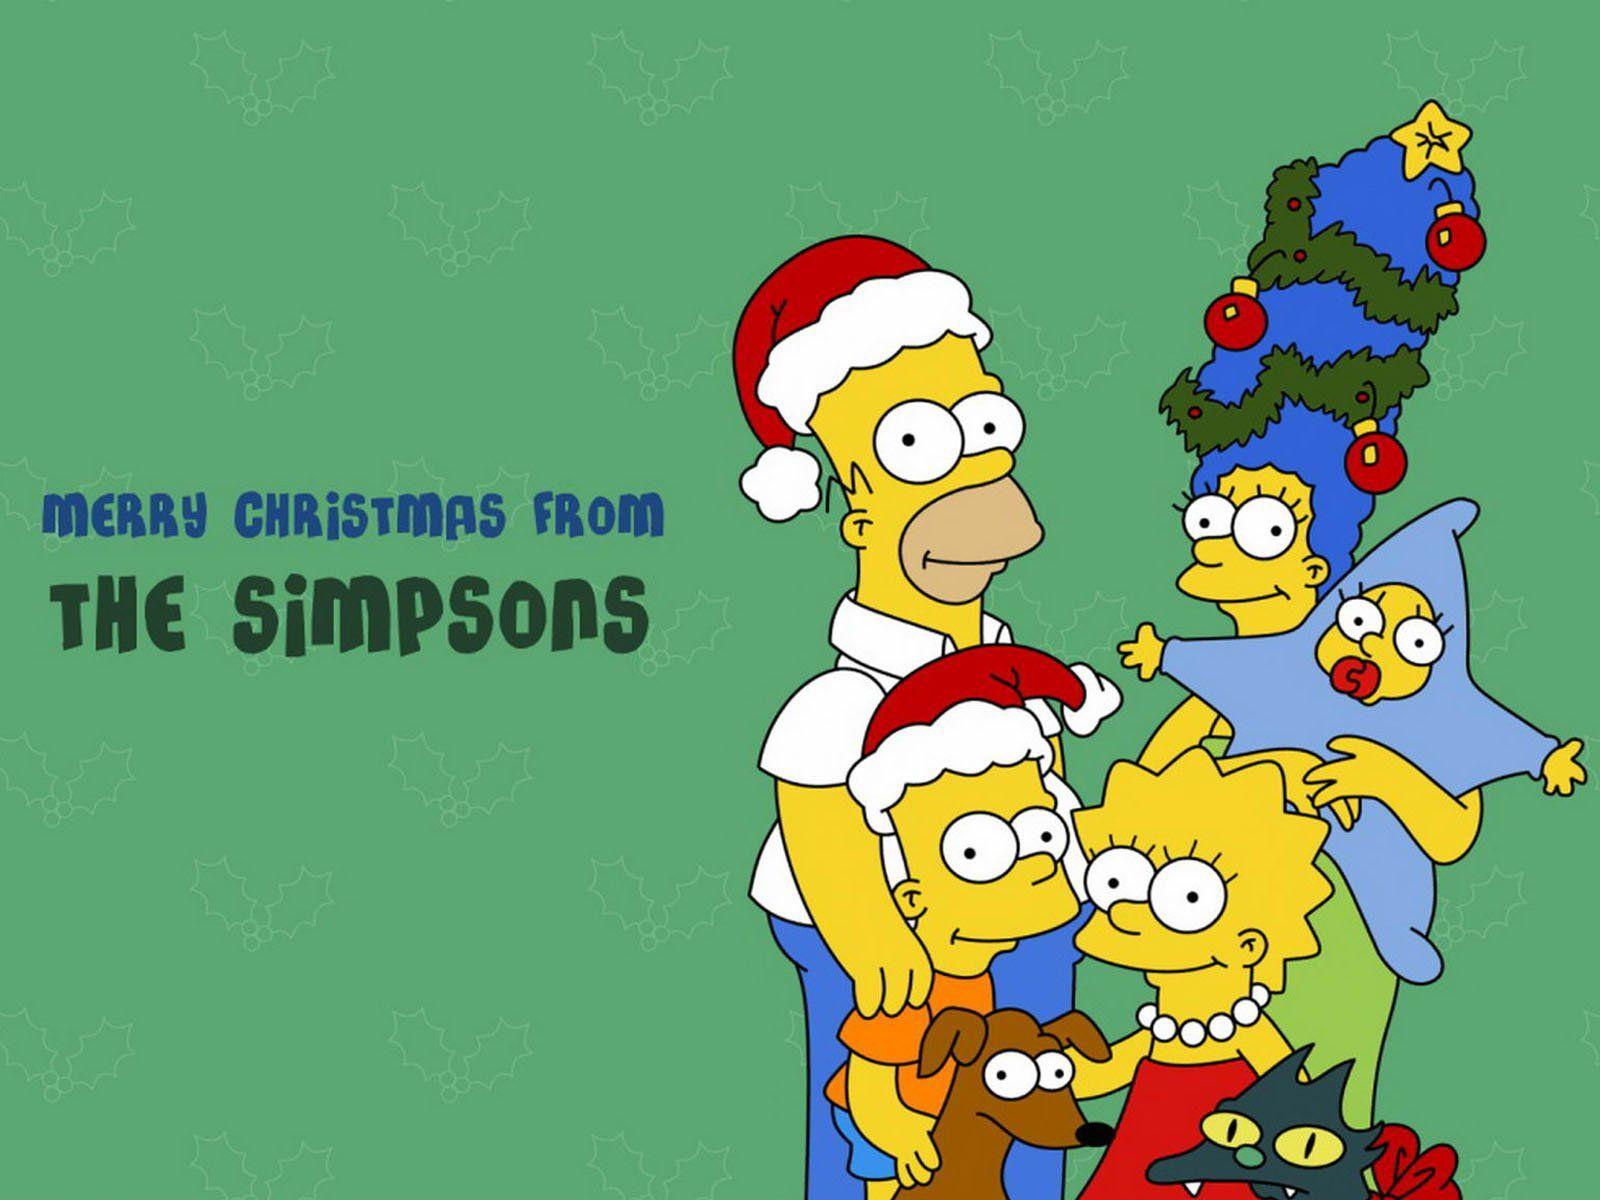 Merry Christmas from The Simpsons Wallpaper. The simpsons, Christmas cartoons, Christmas wallpaper